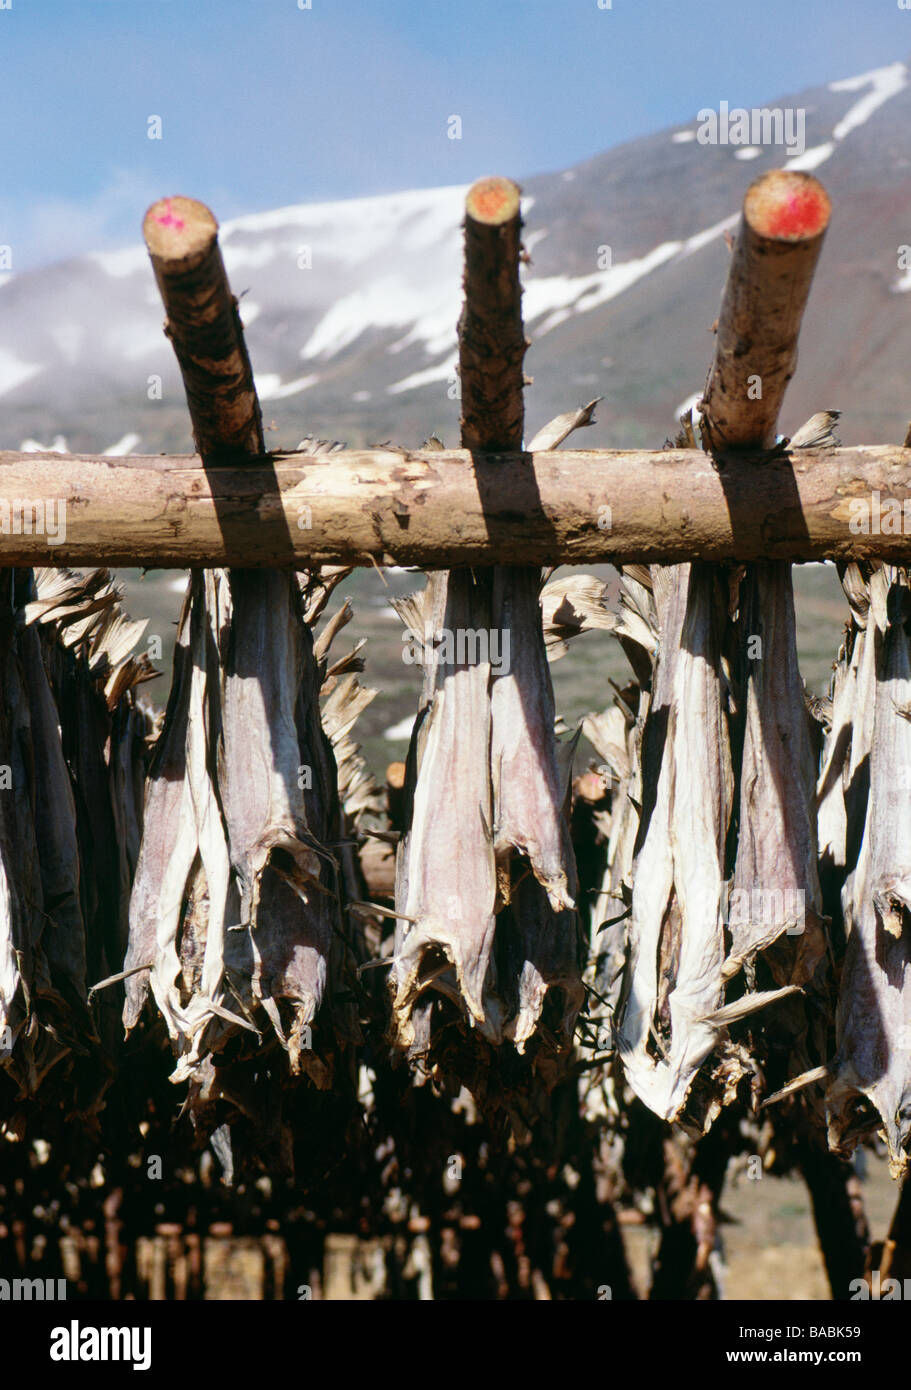 Fish hung on sticks to dry Stock Photo